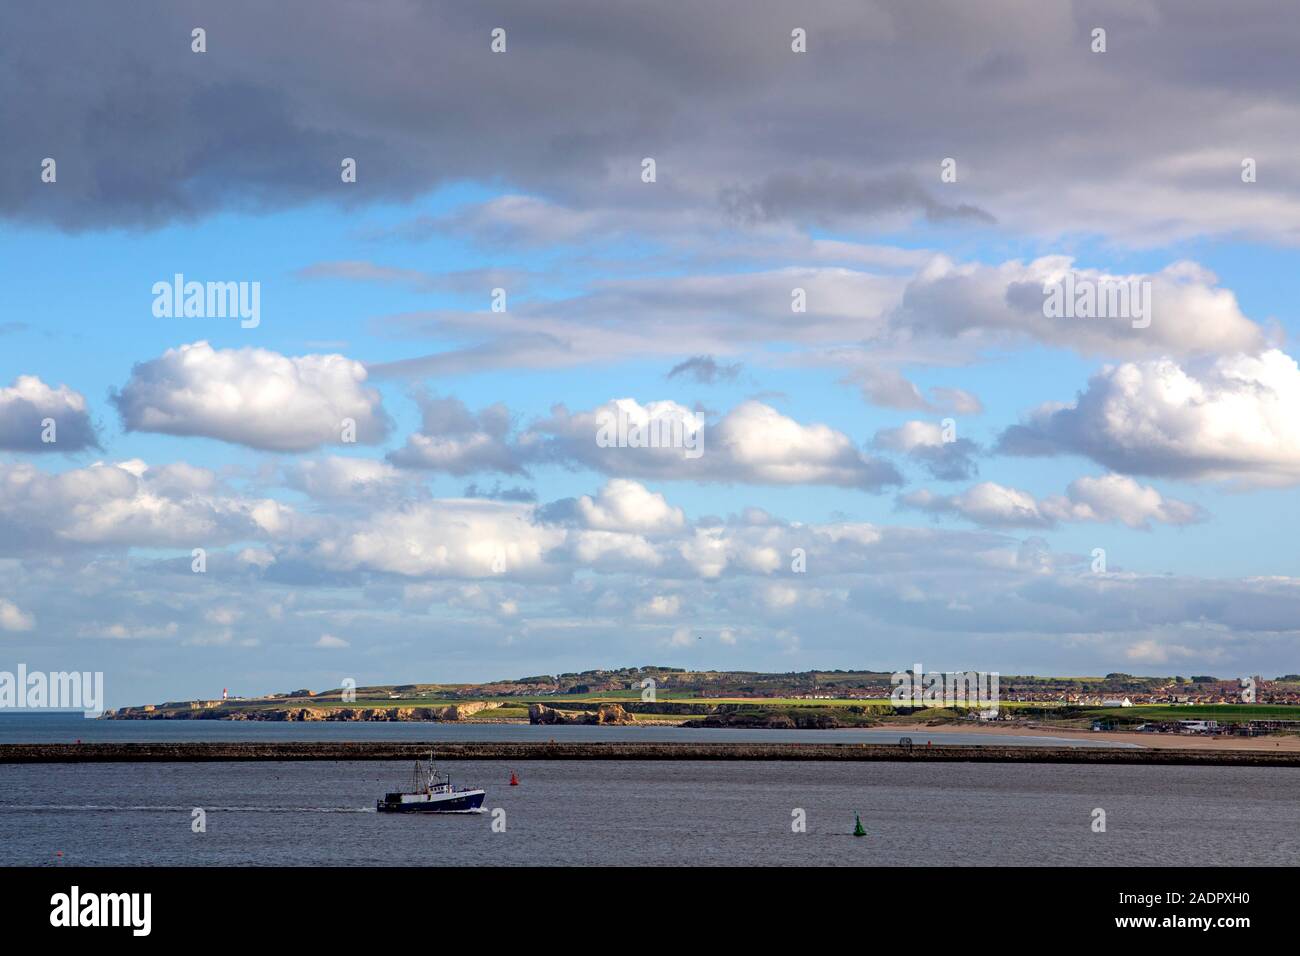 Boat at the mouth of the Tyne River, with South Shields behind Stock Photo